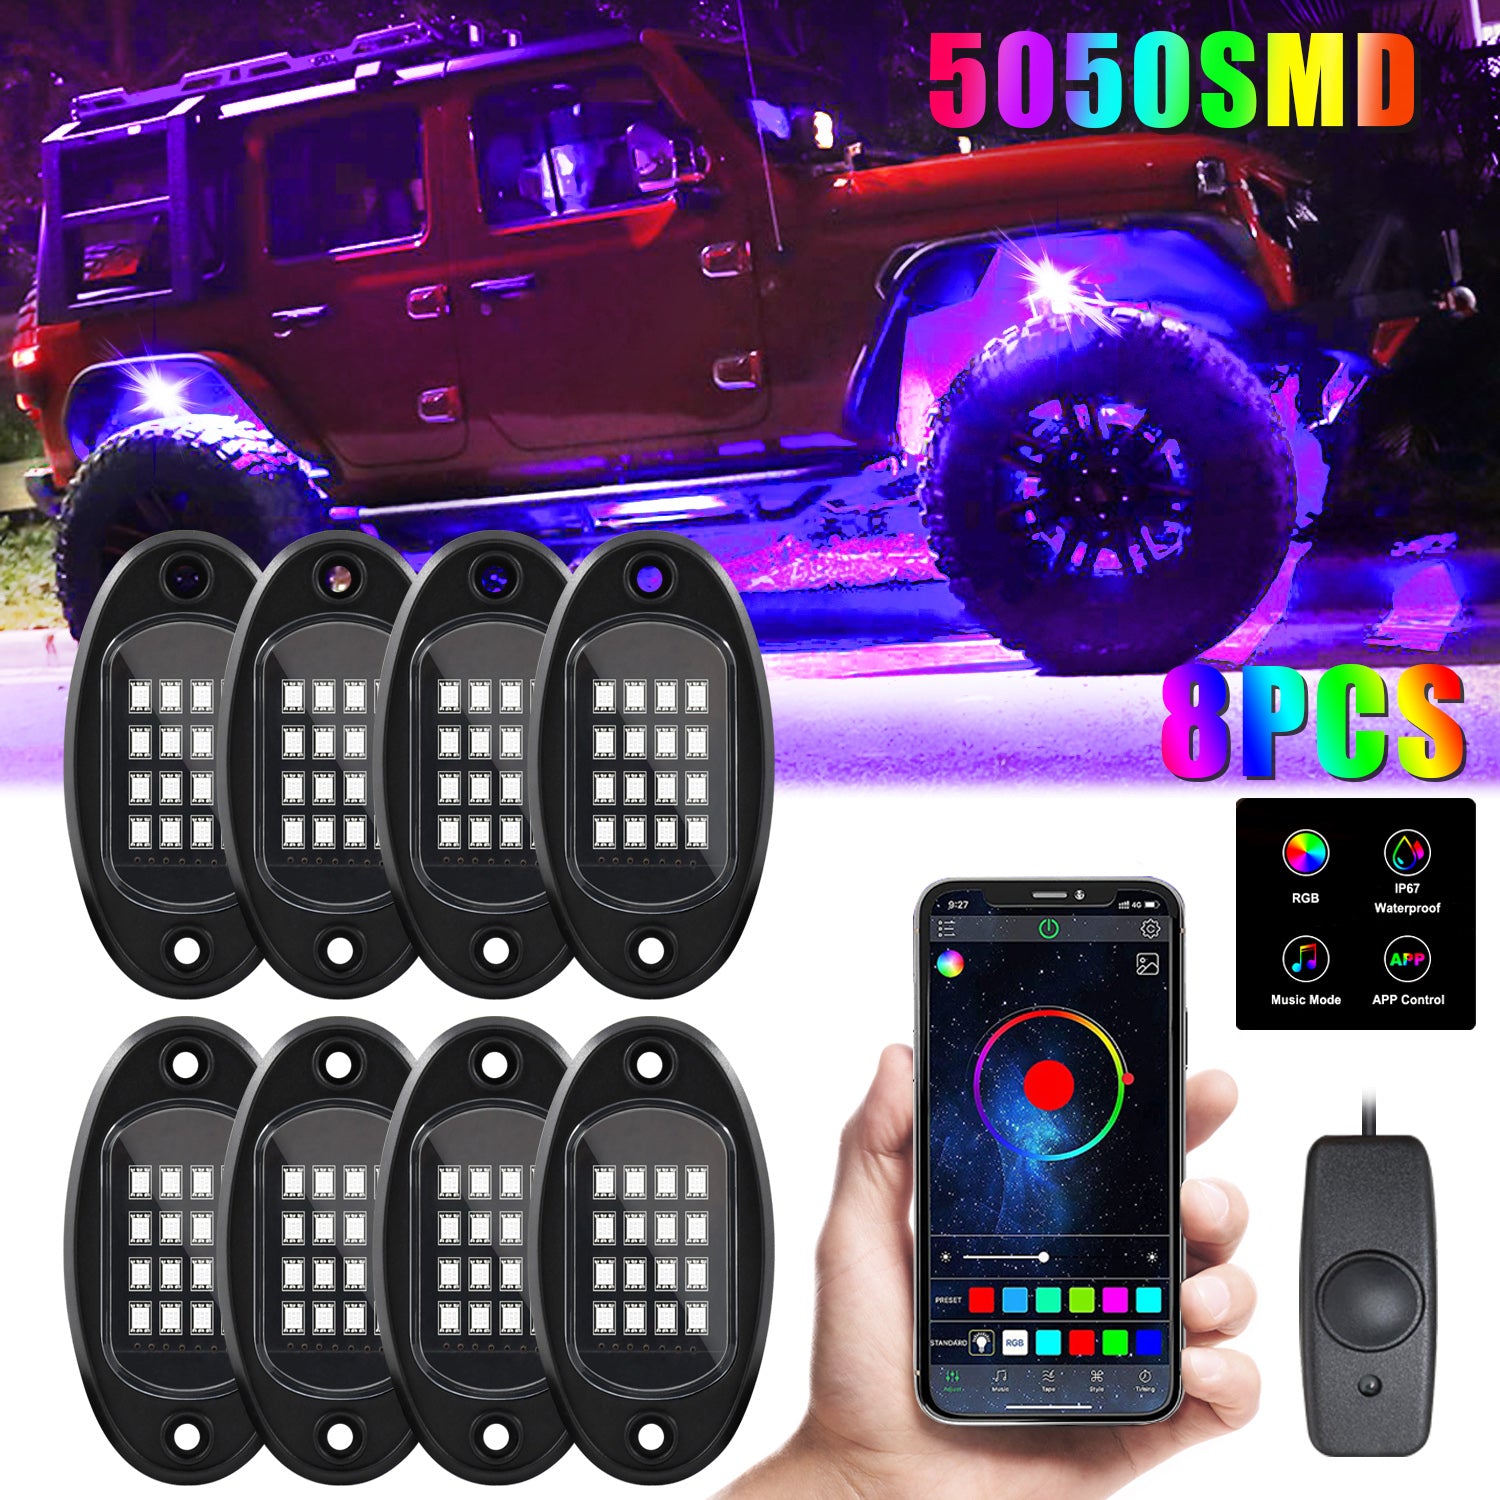 (4 pods) RGB LED Rock Lights, 90 LEDs Multicolor Neon Underglow Light Waterproof Music Lighting Kit with APP & RF Control